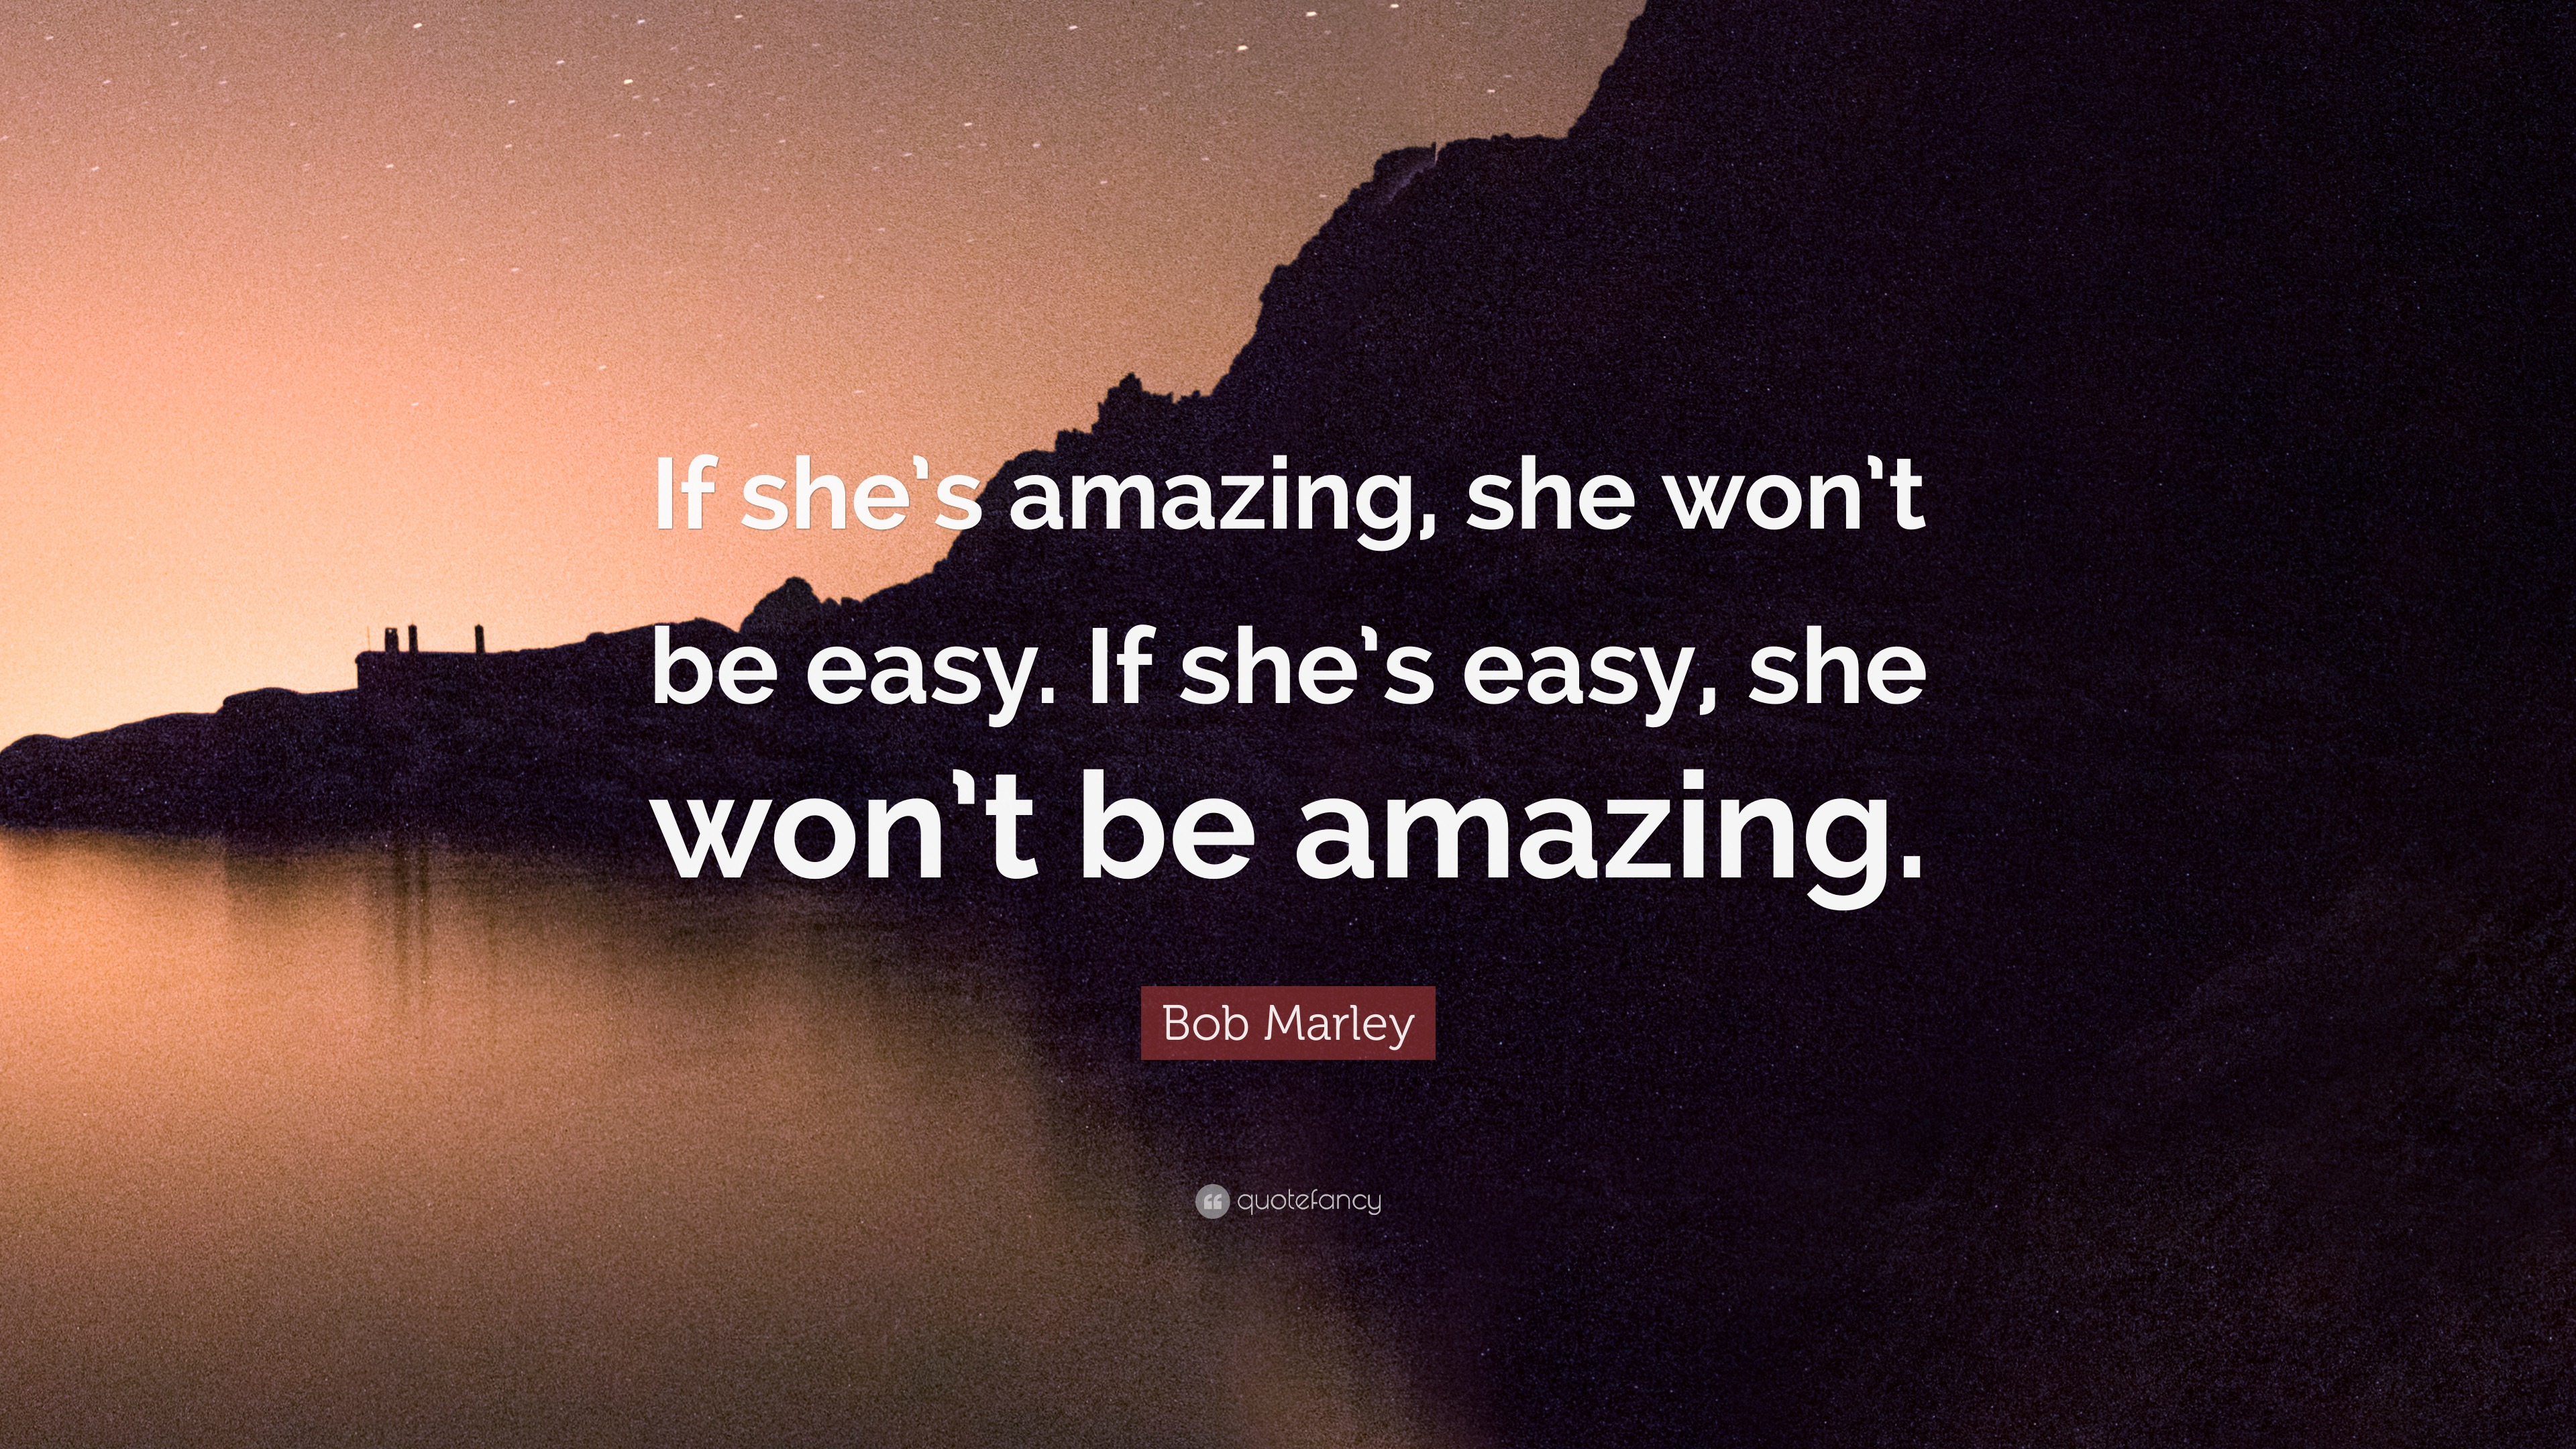 Bob Marley Quote: “If she’s amazing, she won’t be easy. If she’s easy